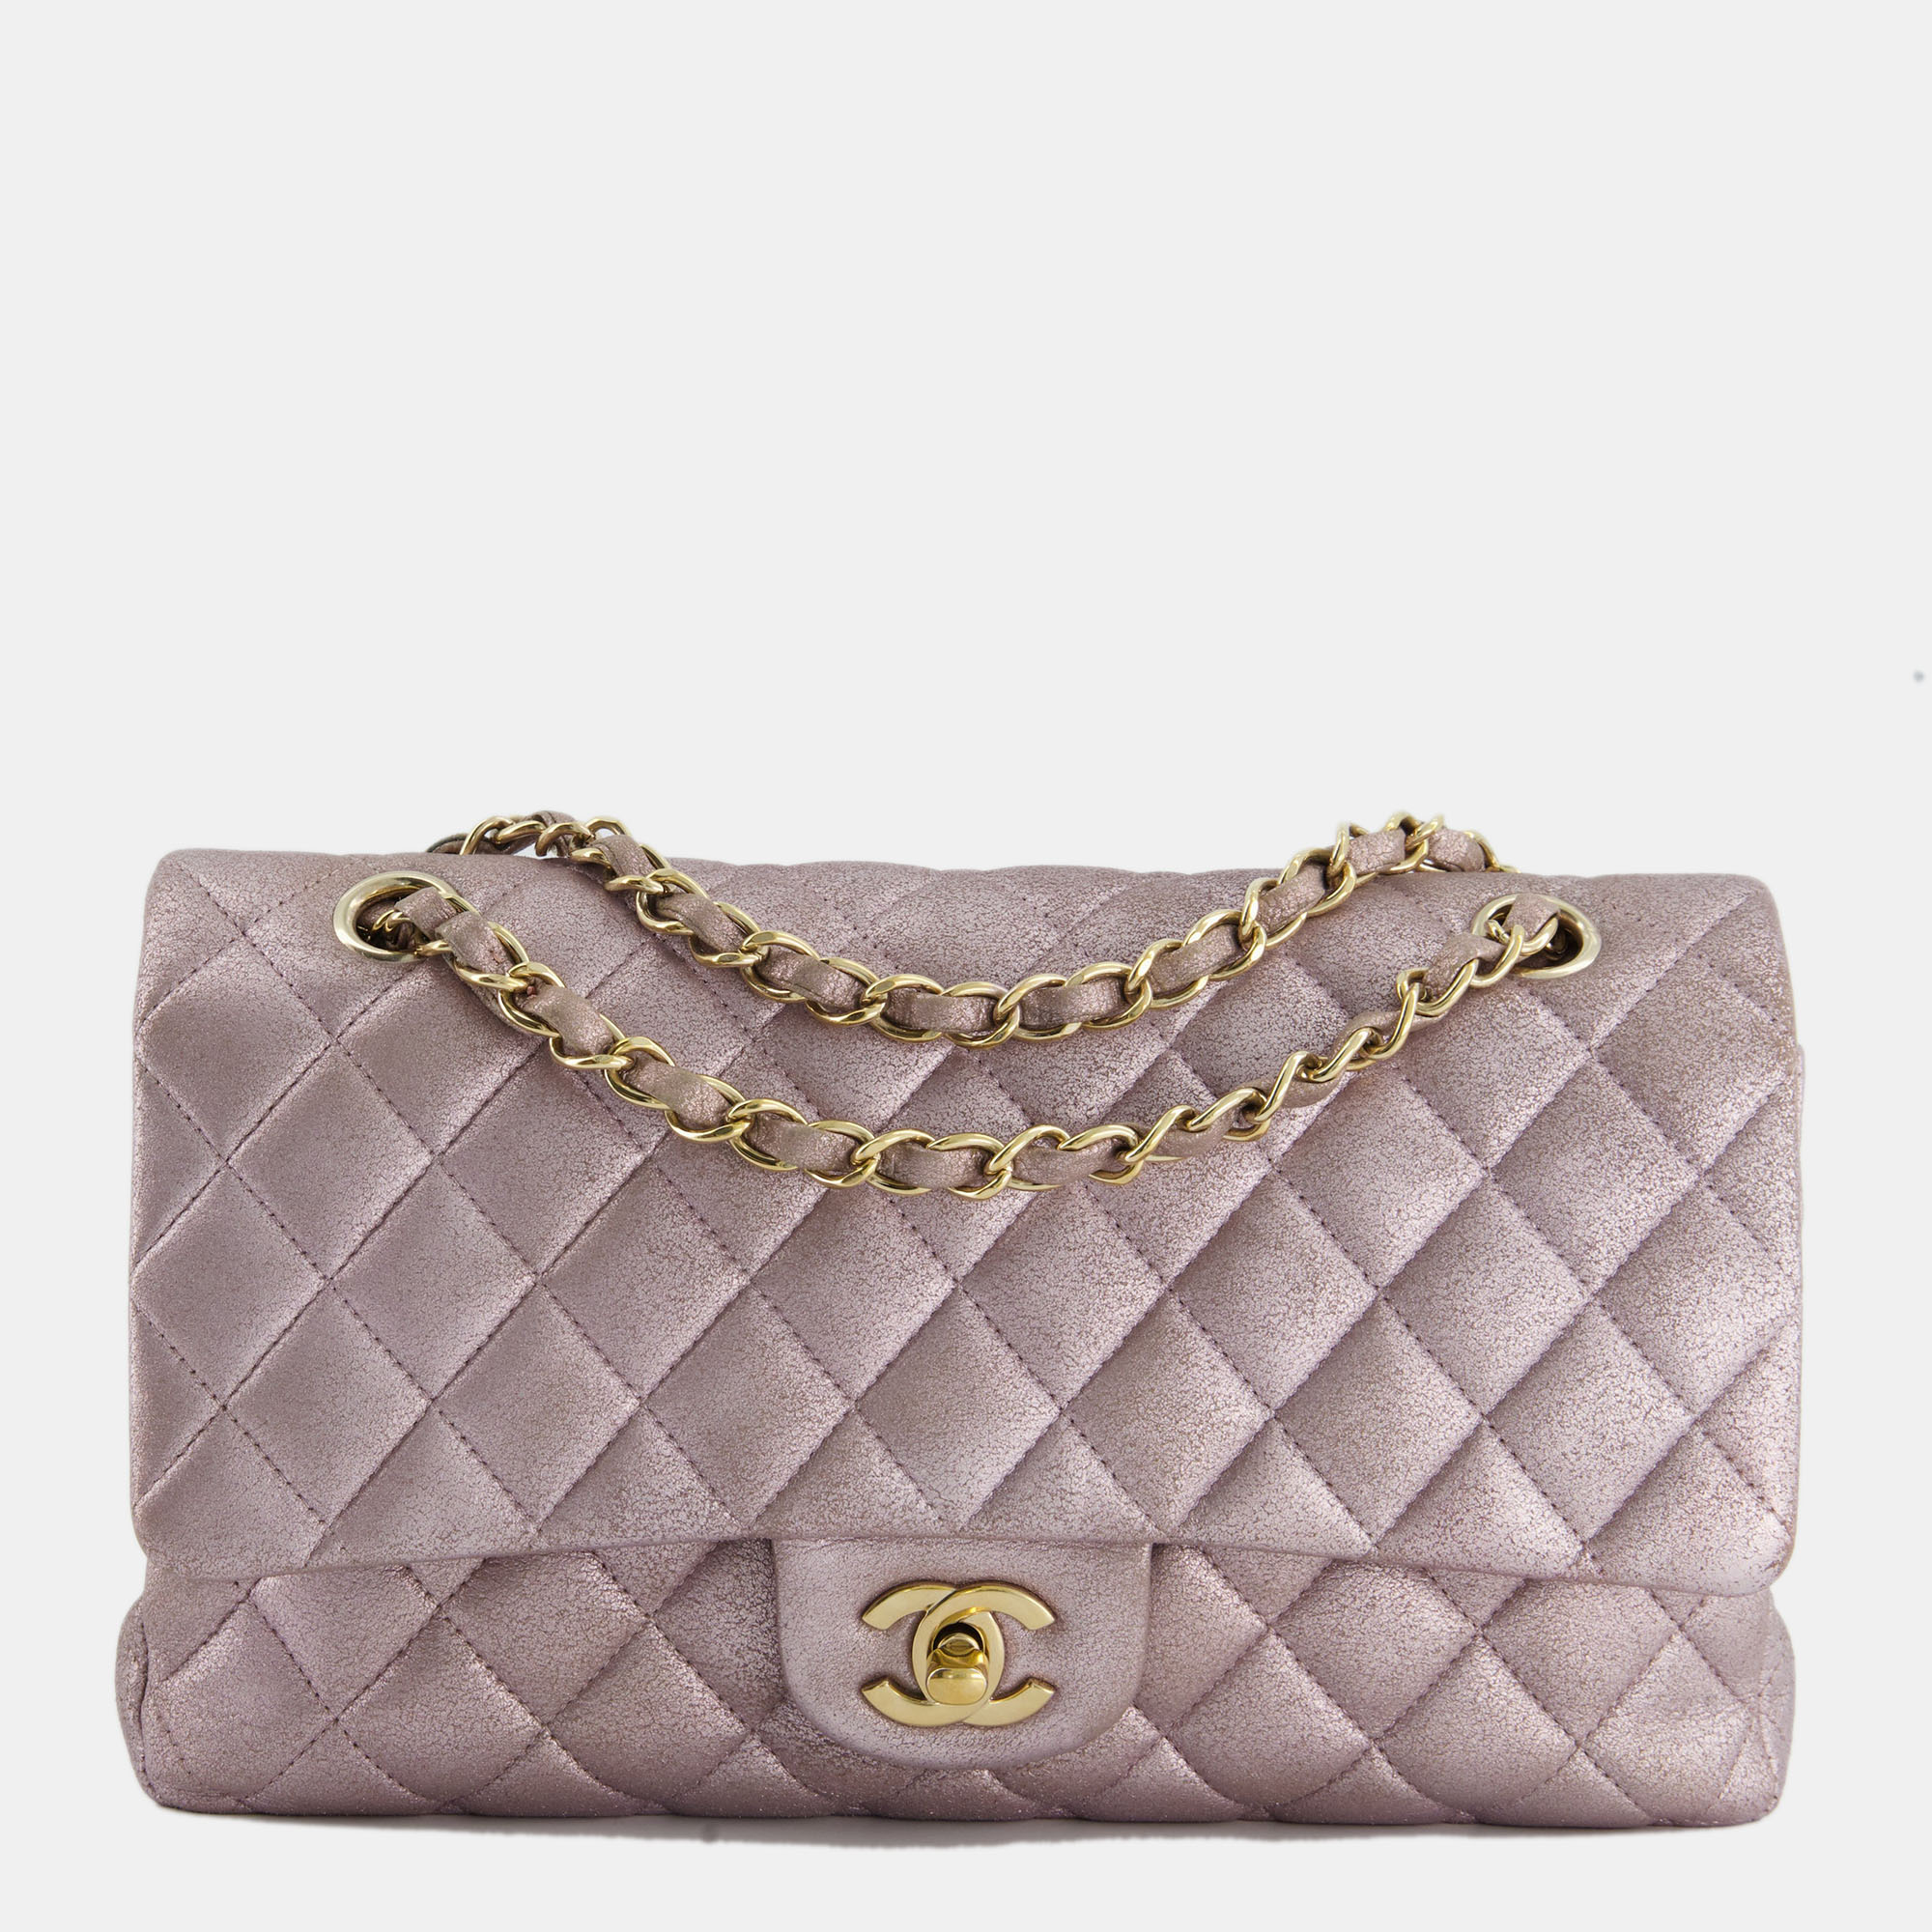 

Chanel Metallic Rose Gold Medium Classic Double Flap Bag in Coated Calfskin with Champagne Gold Hardware, Pink